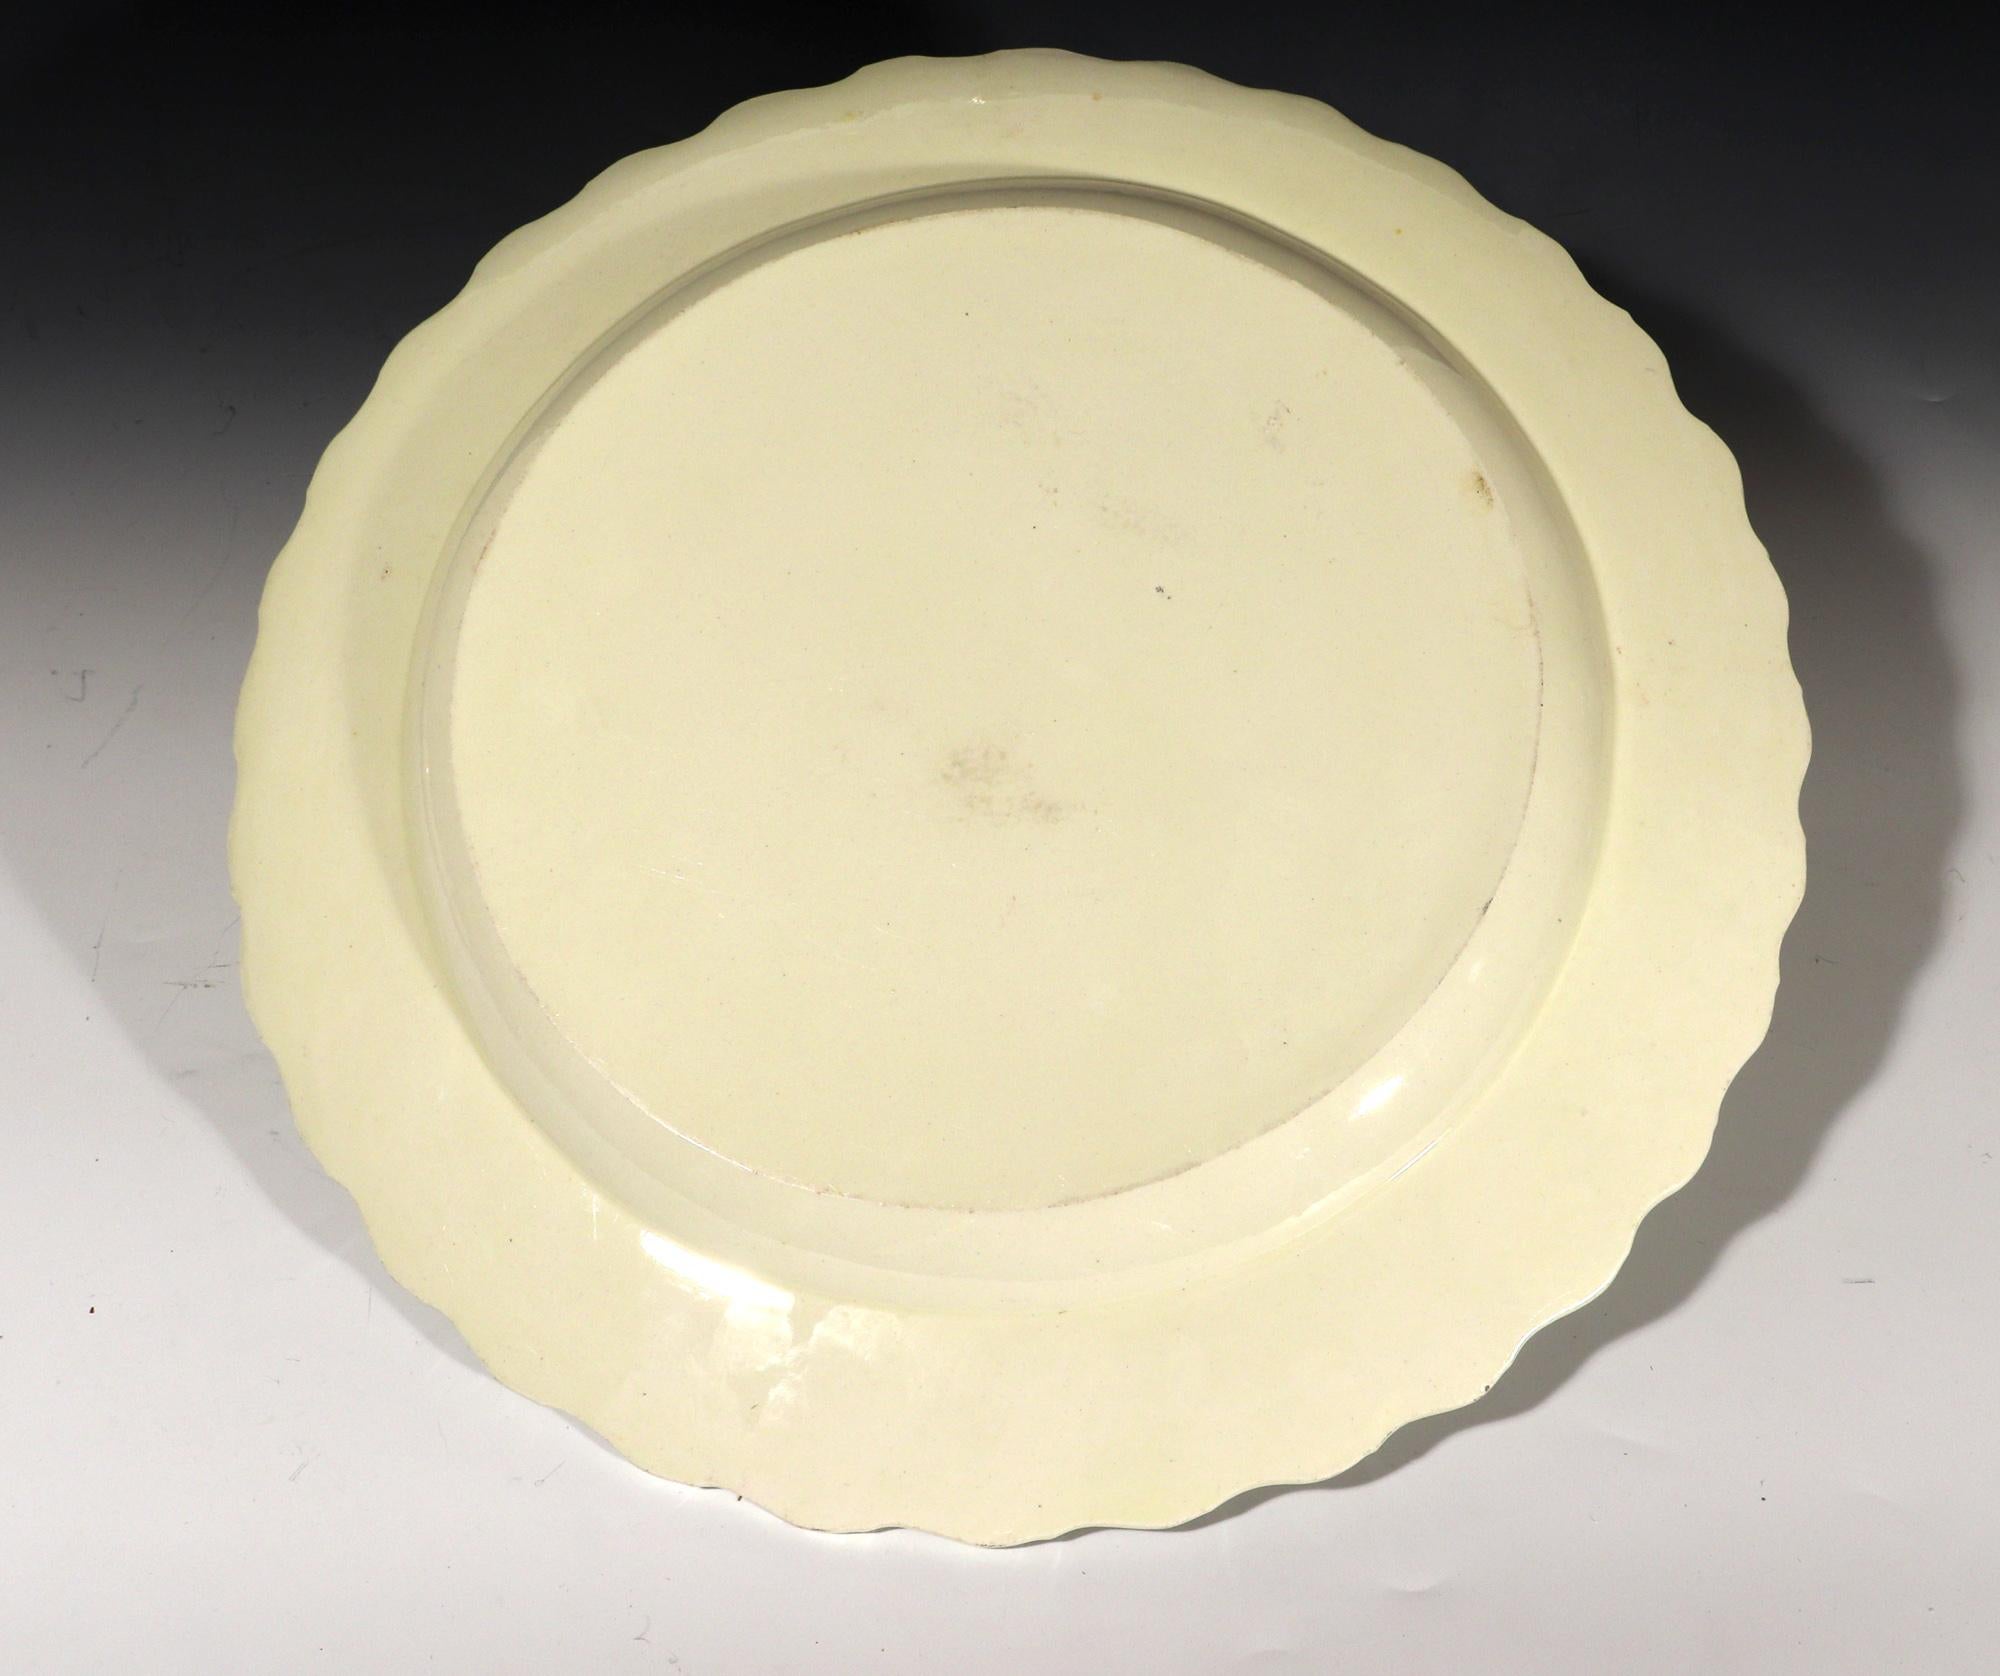 From a collection of creamware-
Antique 18th Century Creamware Large Feather-edged Circular Dish,
Possibly Leeds,
1780-1800

The deep plain circular creamware circular dish has a moulded feather edge rim.

Dimensions: 11 inches x 1 inches